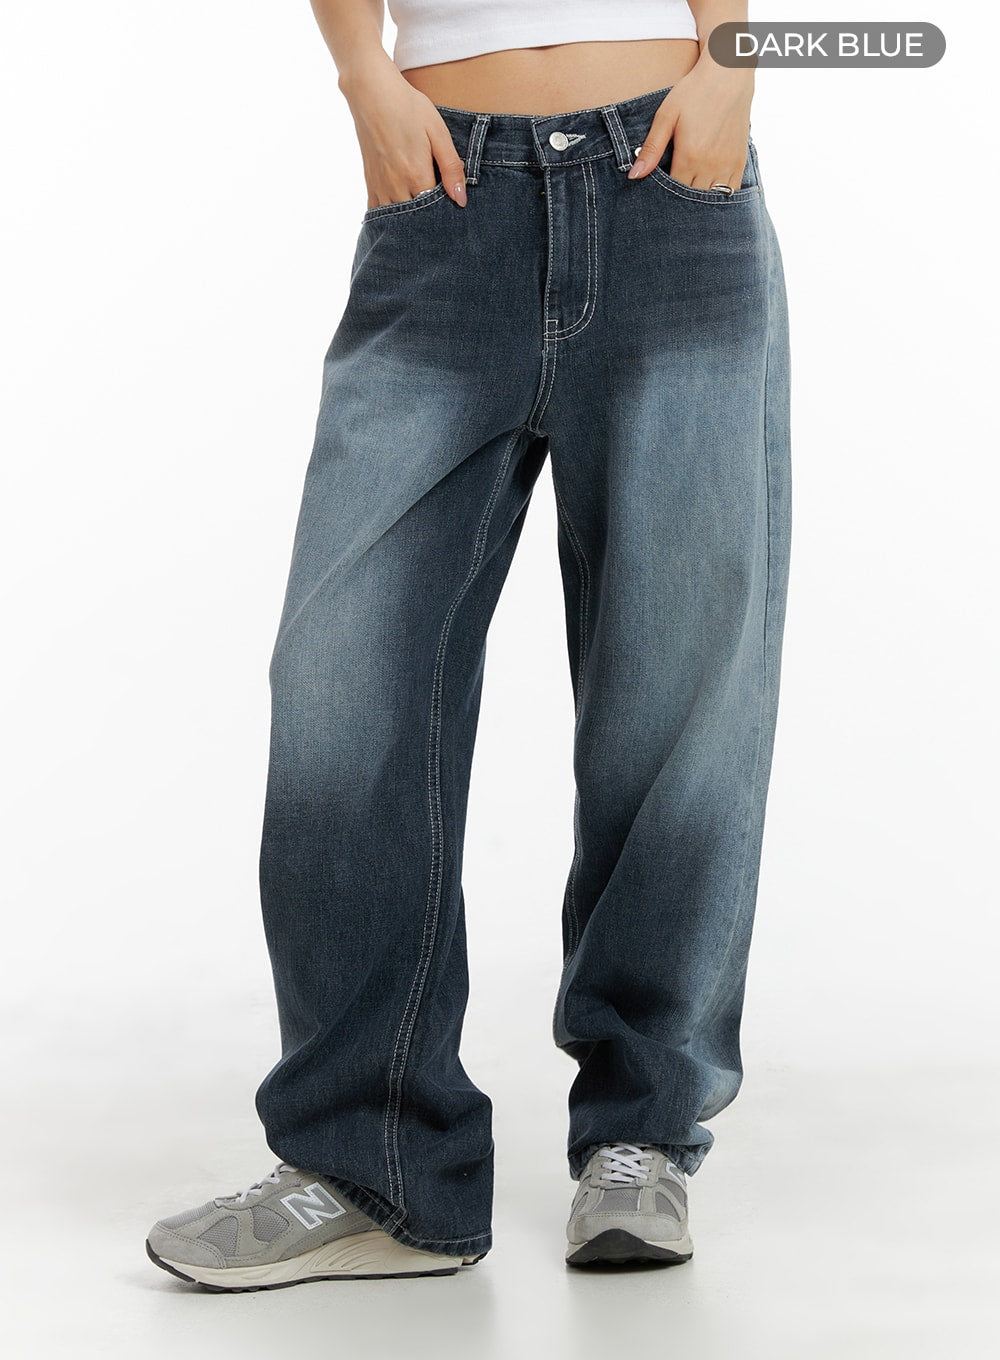 Baggy Fit Mens Bermuda Shorts Wide Leg, Cropped Denim Denim Pants For  Summer Hip Hop Style Z0216 From Lianwu06, $25.42